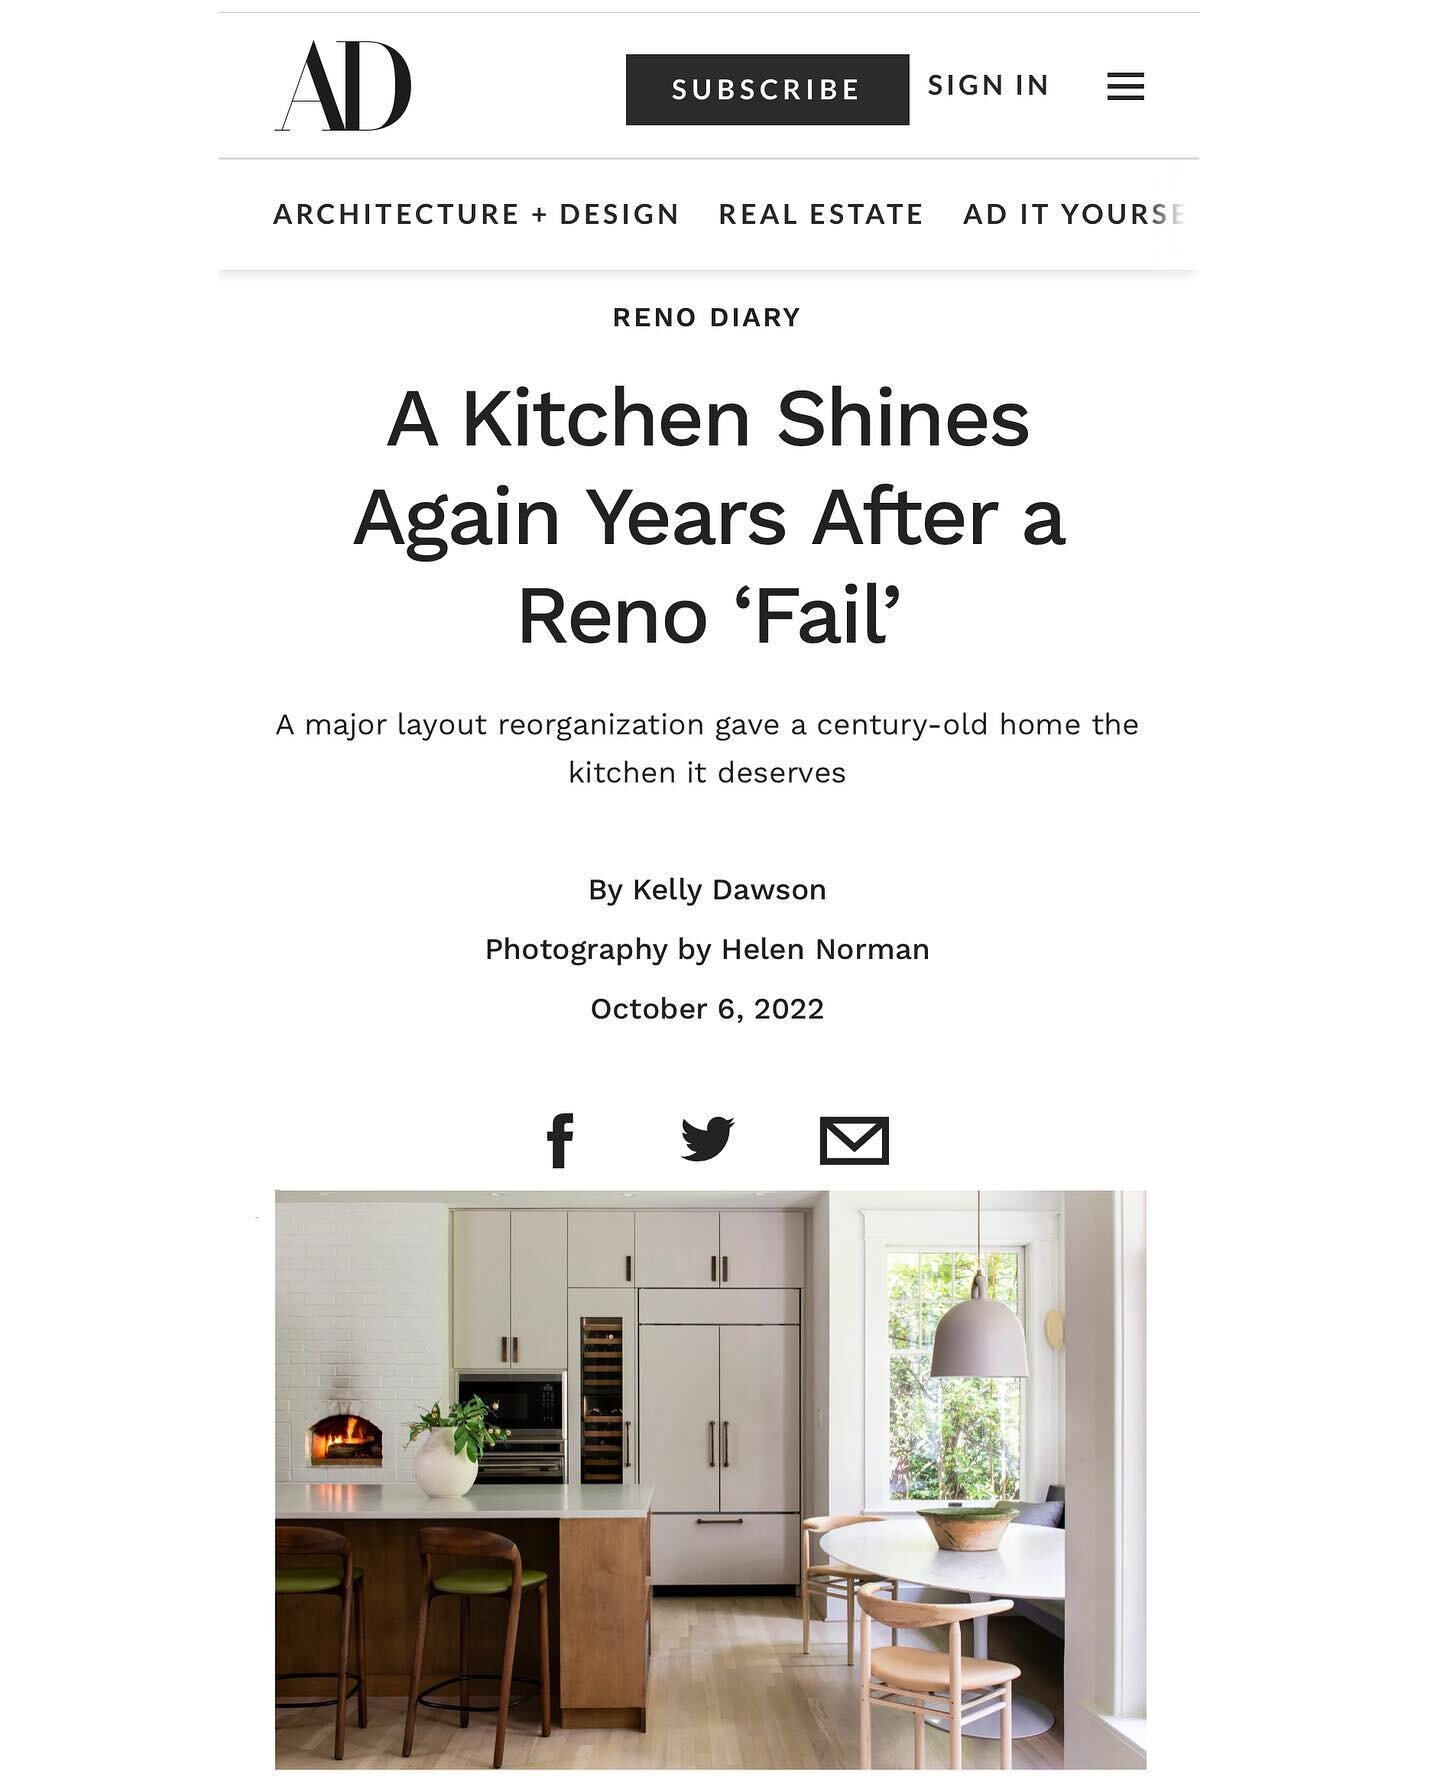 Great article about one of our recent projects from @archdigest @getclever. Thank you to @fowlkesstudio for the design, @leyltd for the build, @kellydawsonwrites for the article, and @helennorman for the photos featured in the article.

Check out the